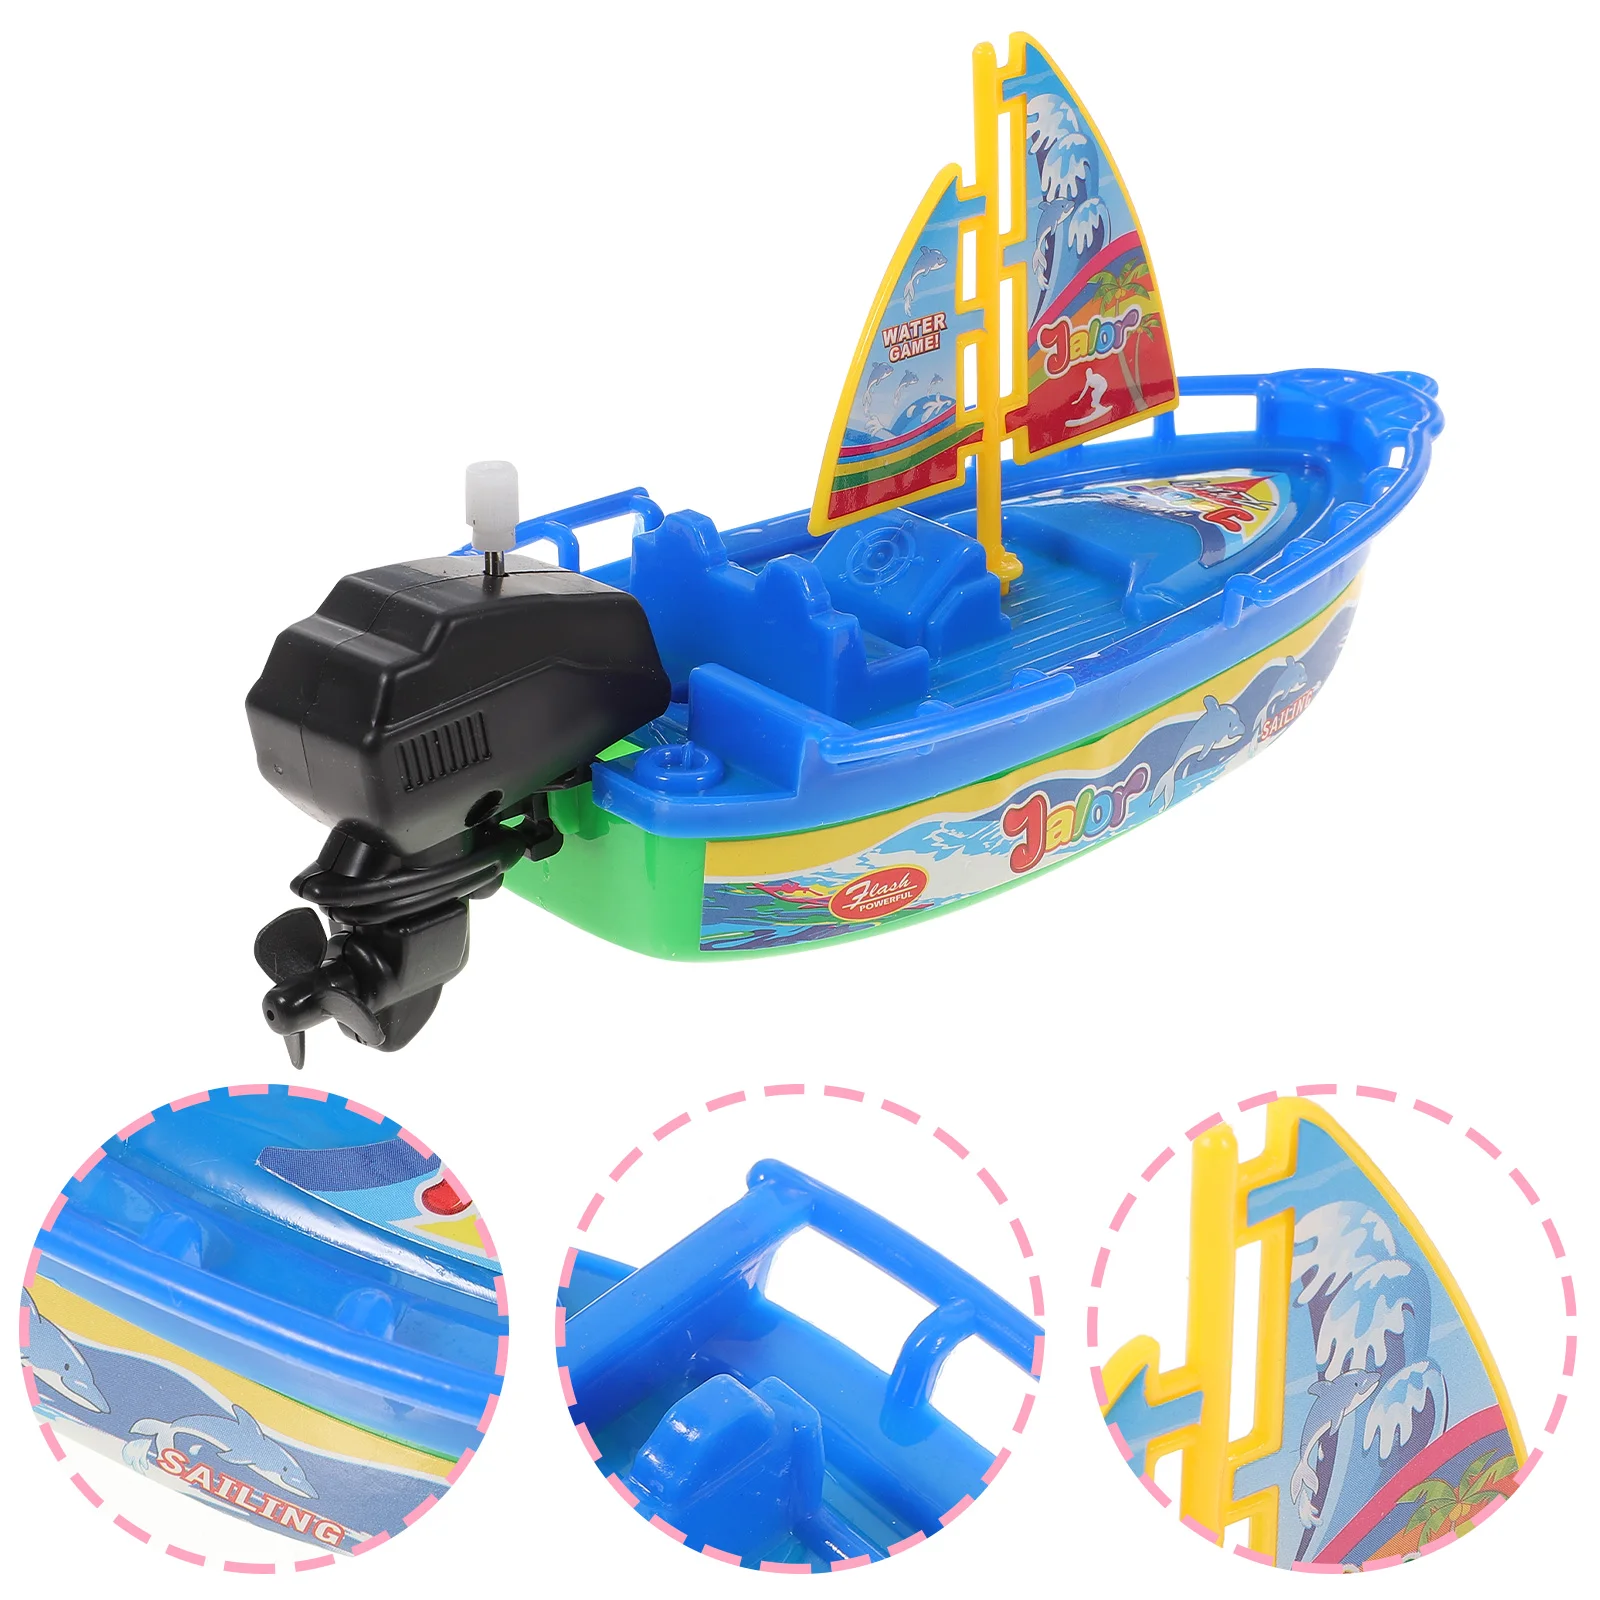 

2Pcs Bath Toy Little Boat Wind-up Toy Water Sprayer Toy Plastic Tugboats for Bathtub (Random Color)